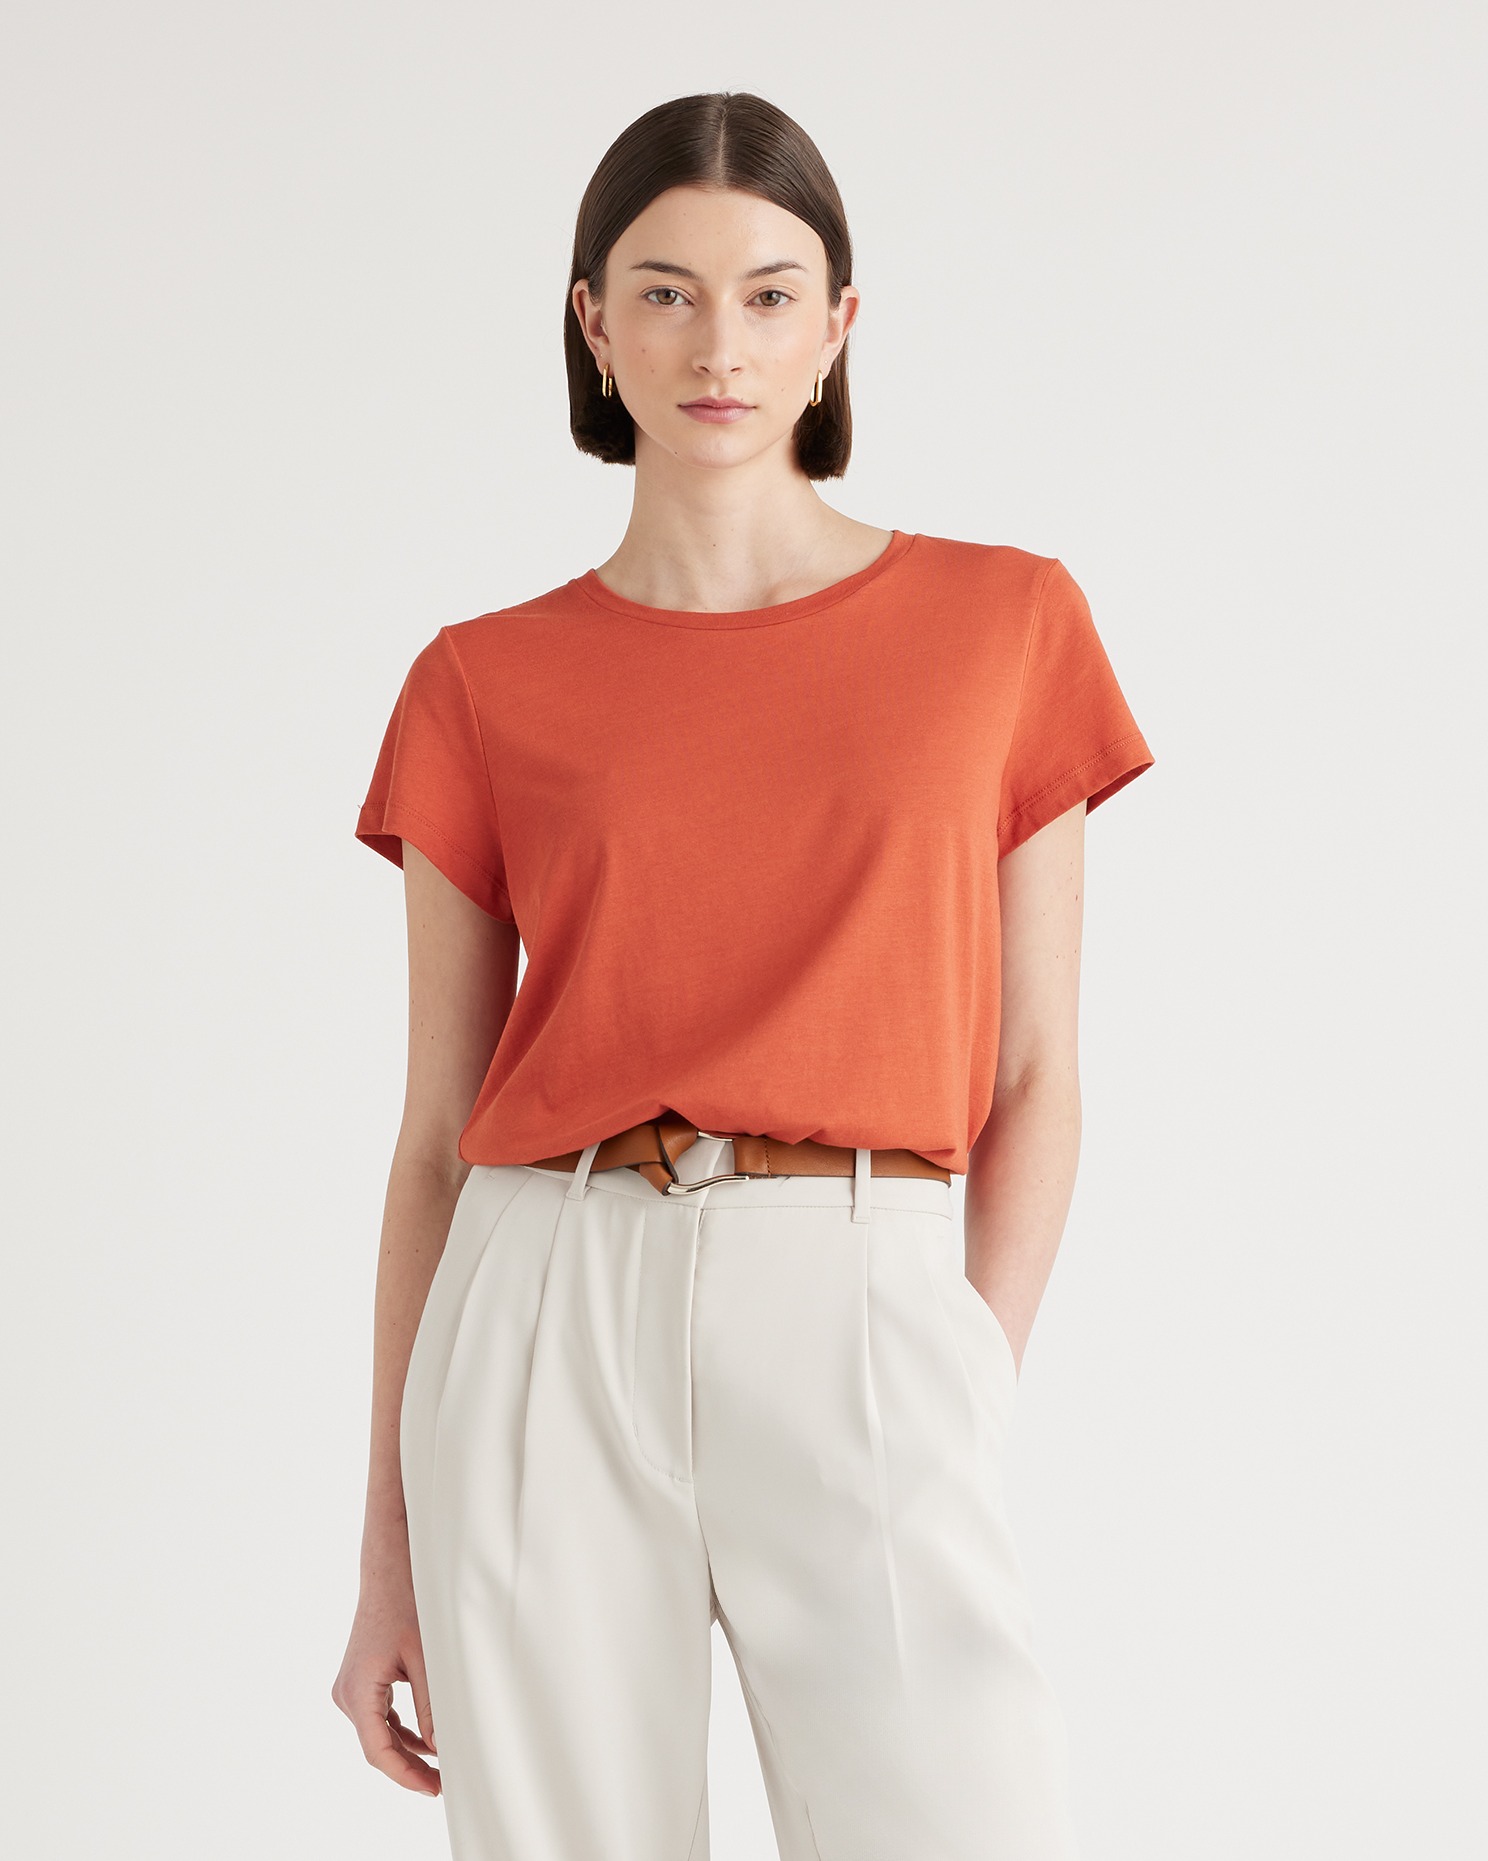 Quince Women's Cotton Modal Crew Neck Swing T-shirt In Burnt Sienna